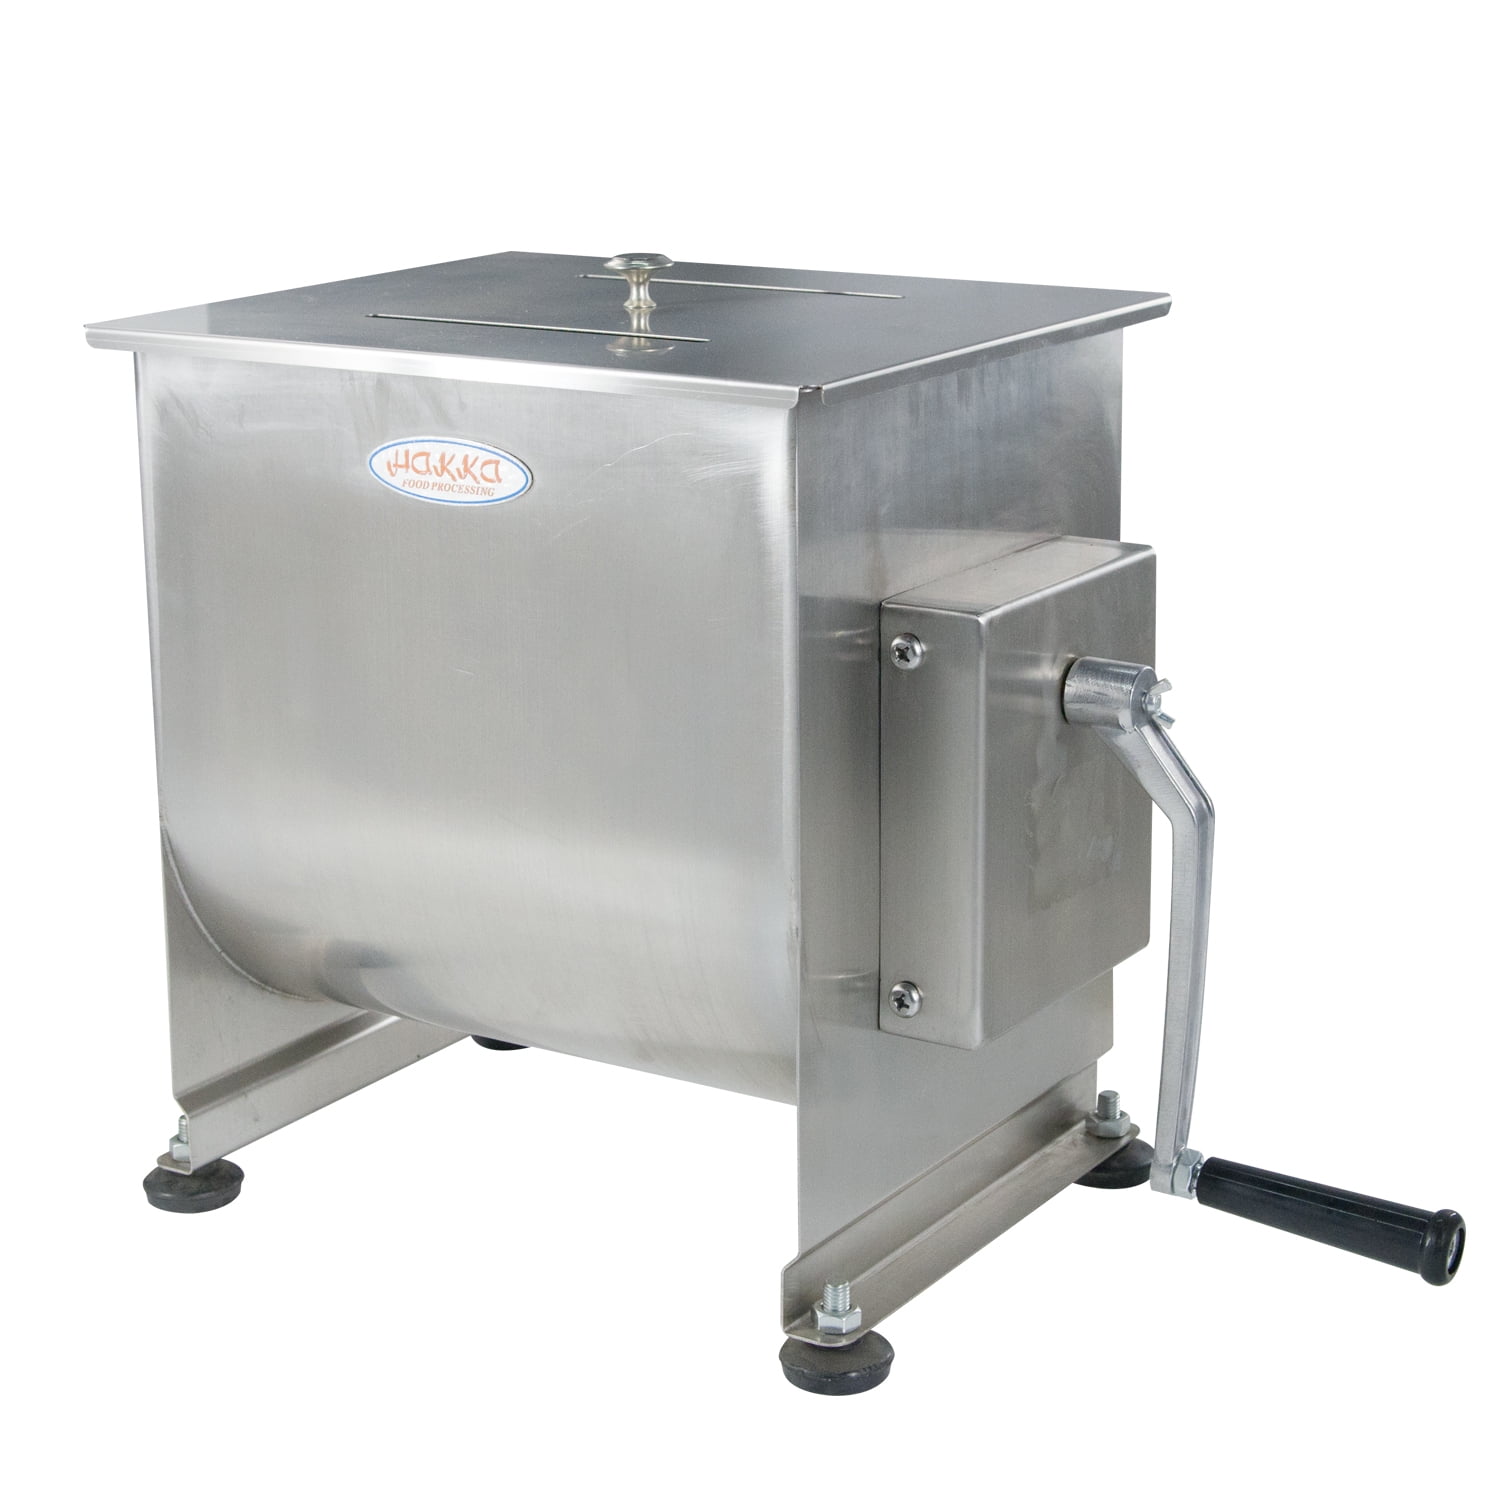 Hakka+44lbs+Tank+Commercial+Electric+Meat+Mixer+Fme02b+%2820liters